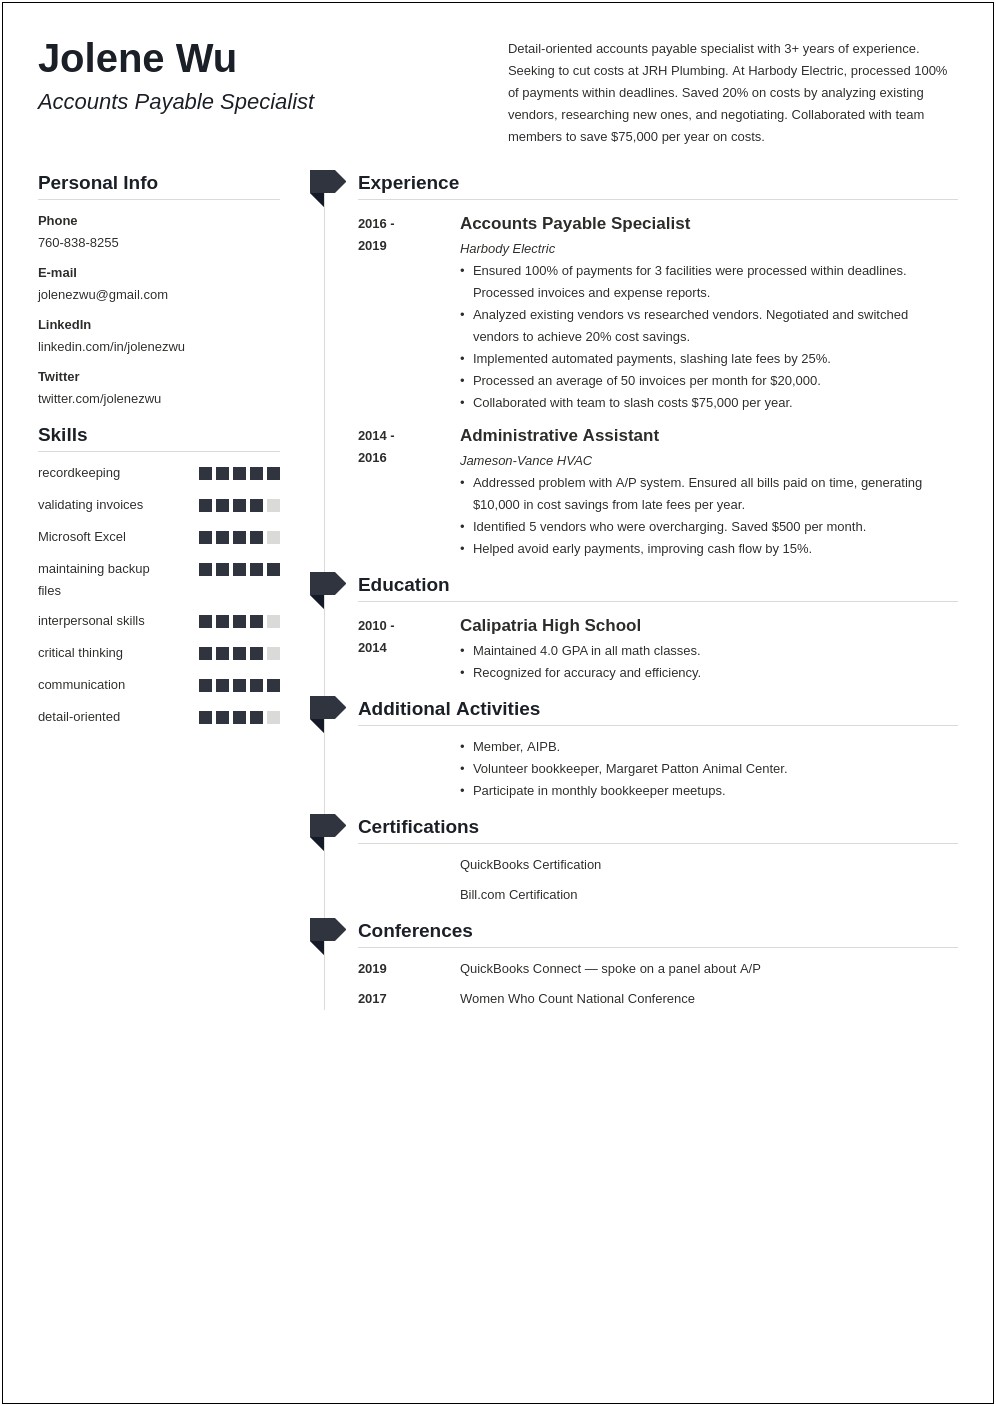 Free Sample Resume For Accounts Payable Specialist